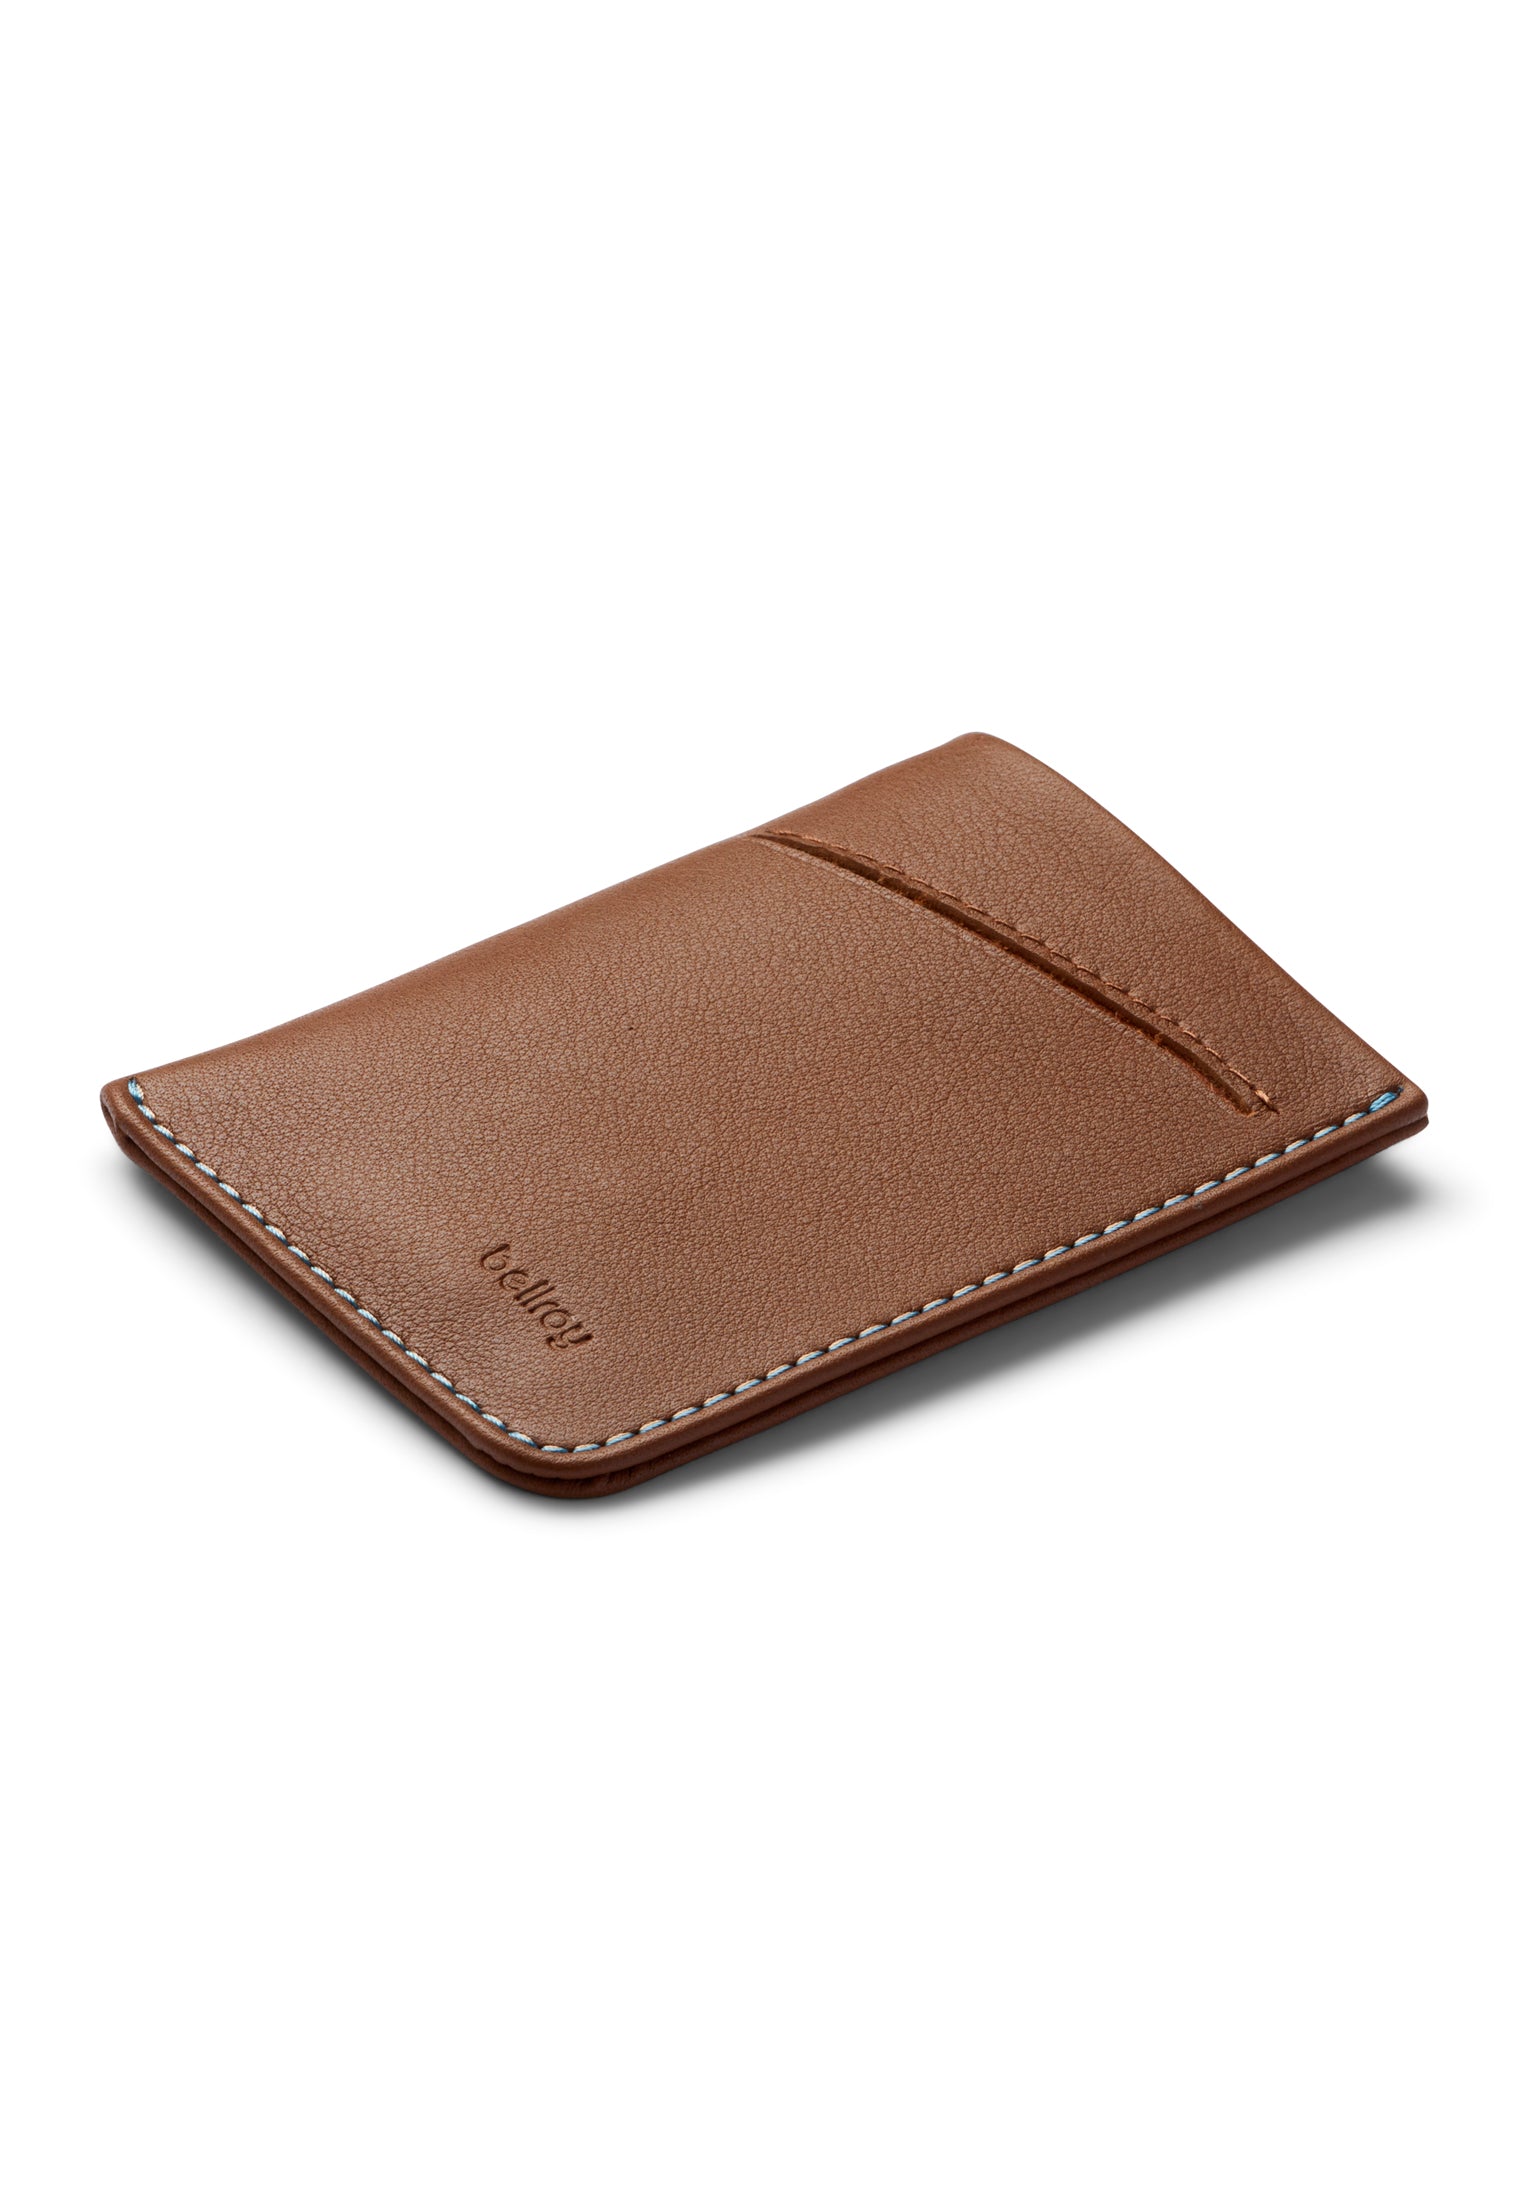 Bellroy Card Sleeve Wallet - Second Edition